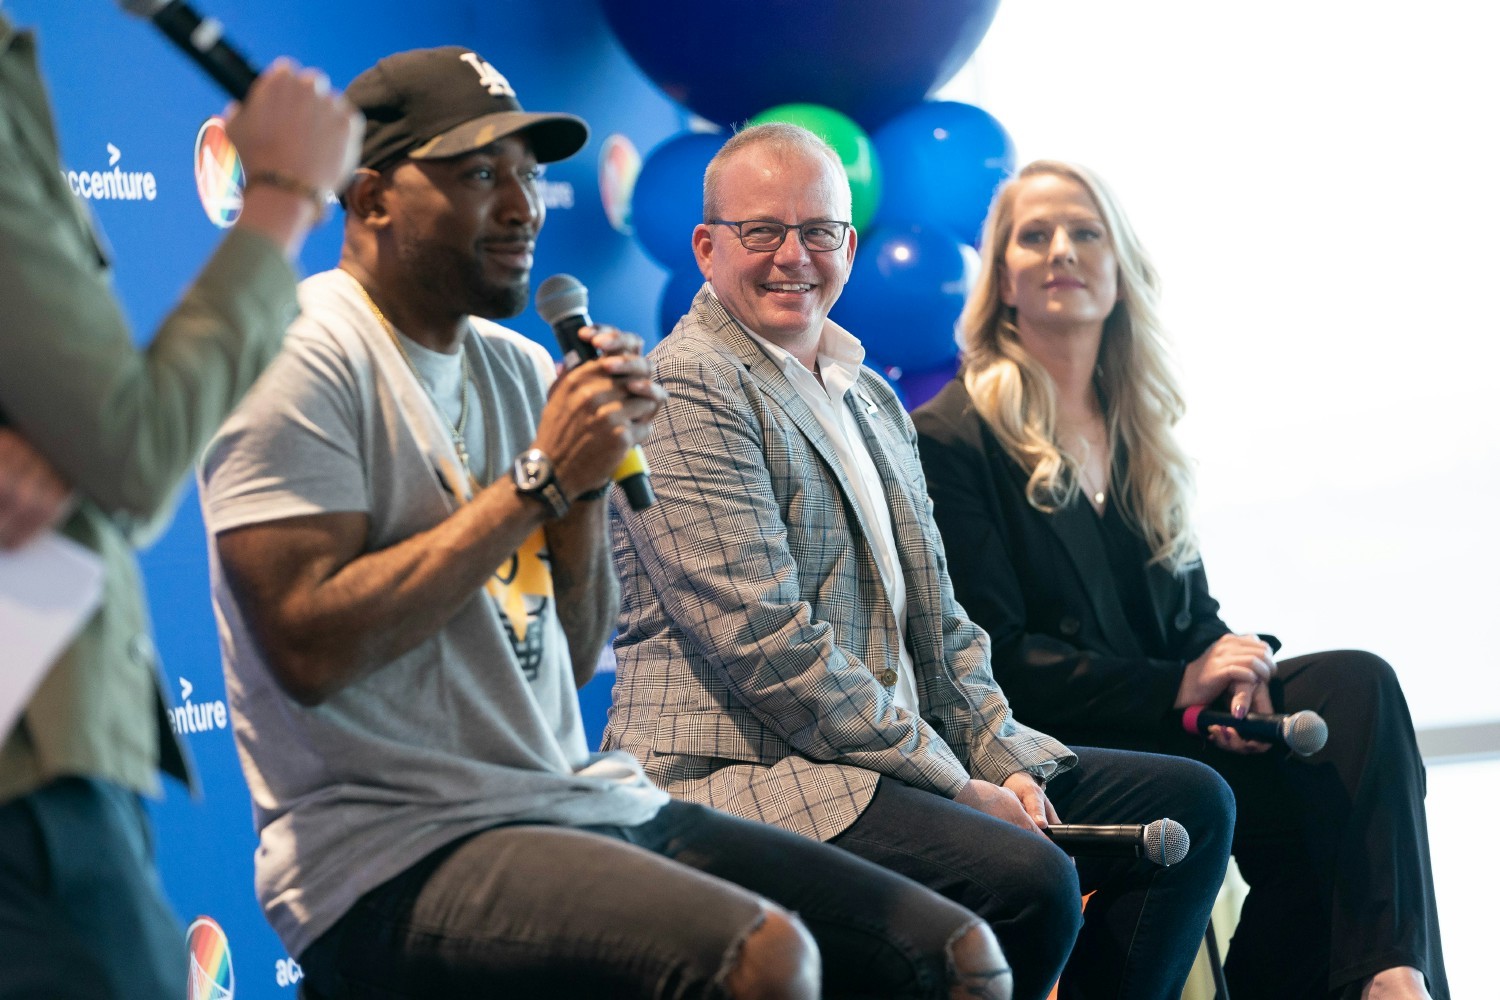 Accenture and the Golden State Warriors sponsor an LGBTQ+ Game Night and Panel, kicking off National Coming Out Day.